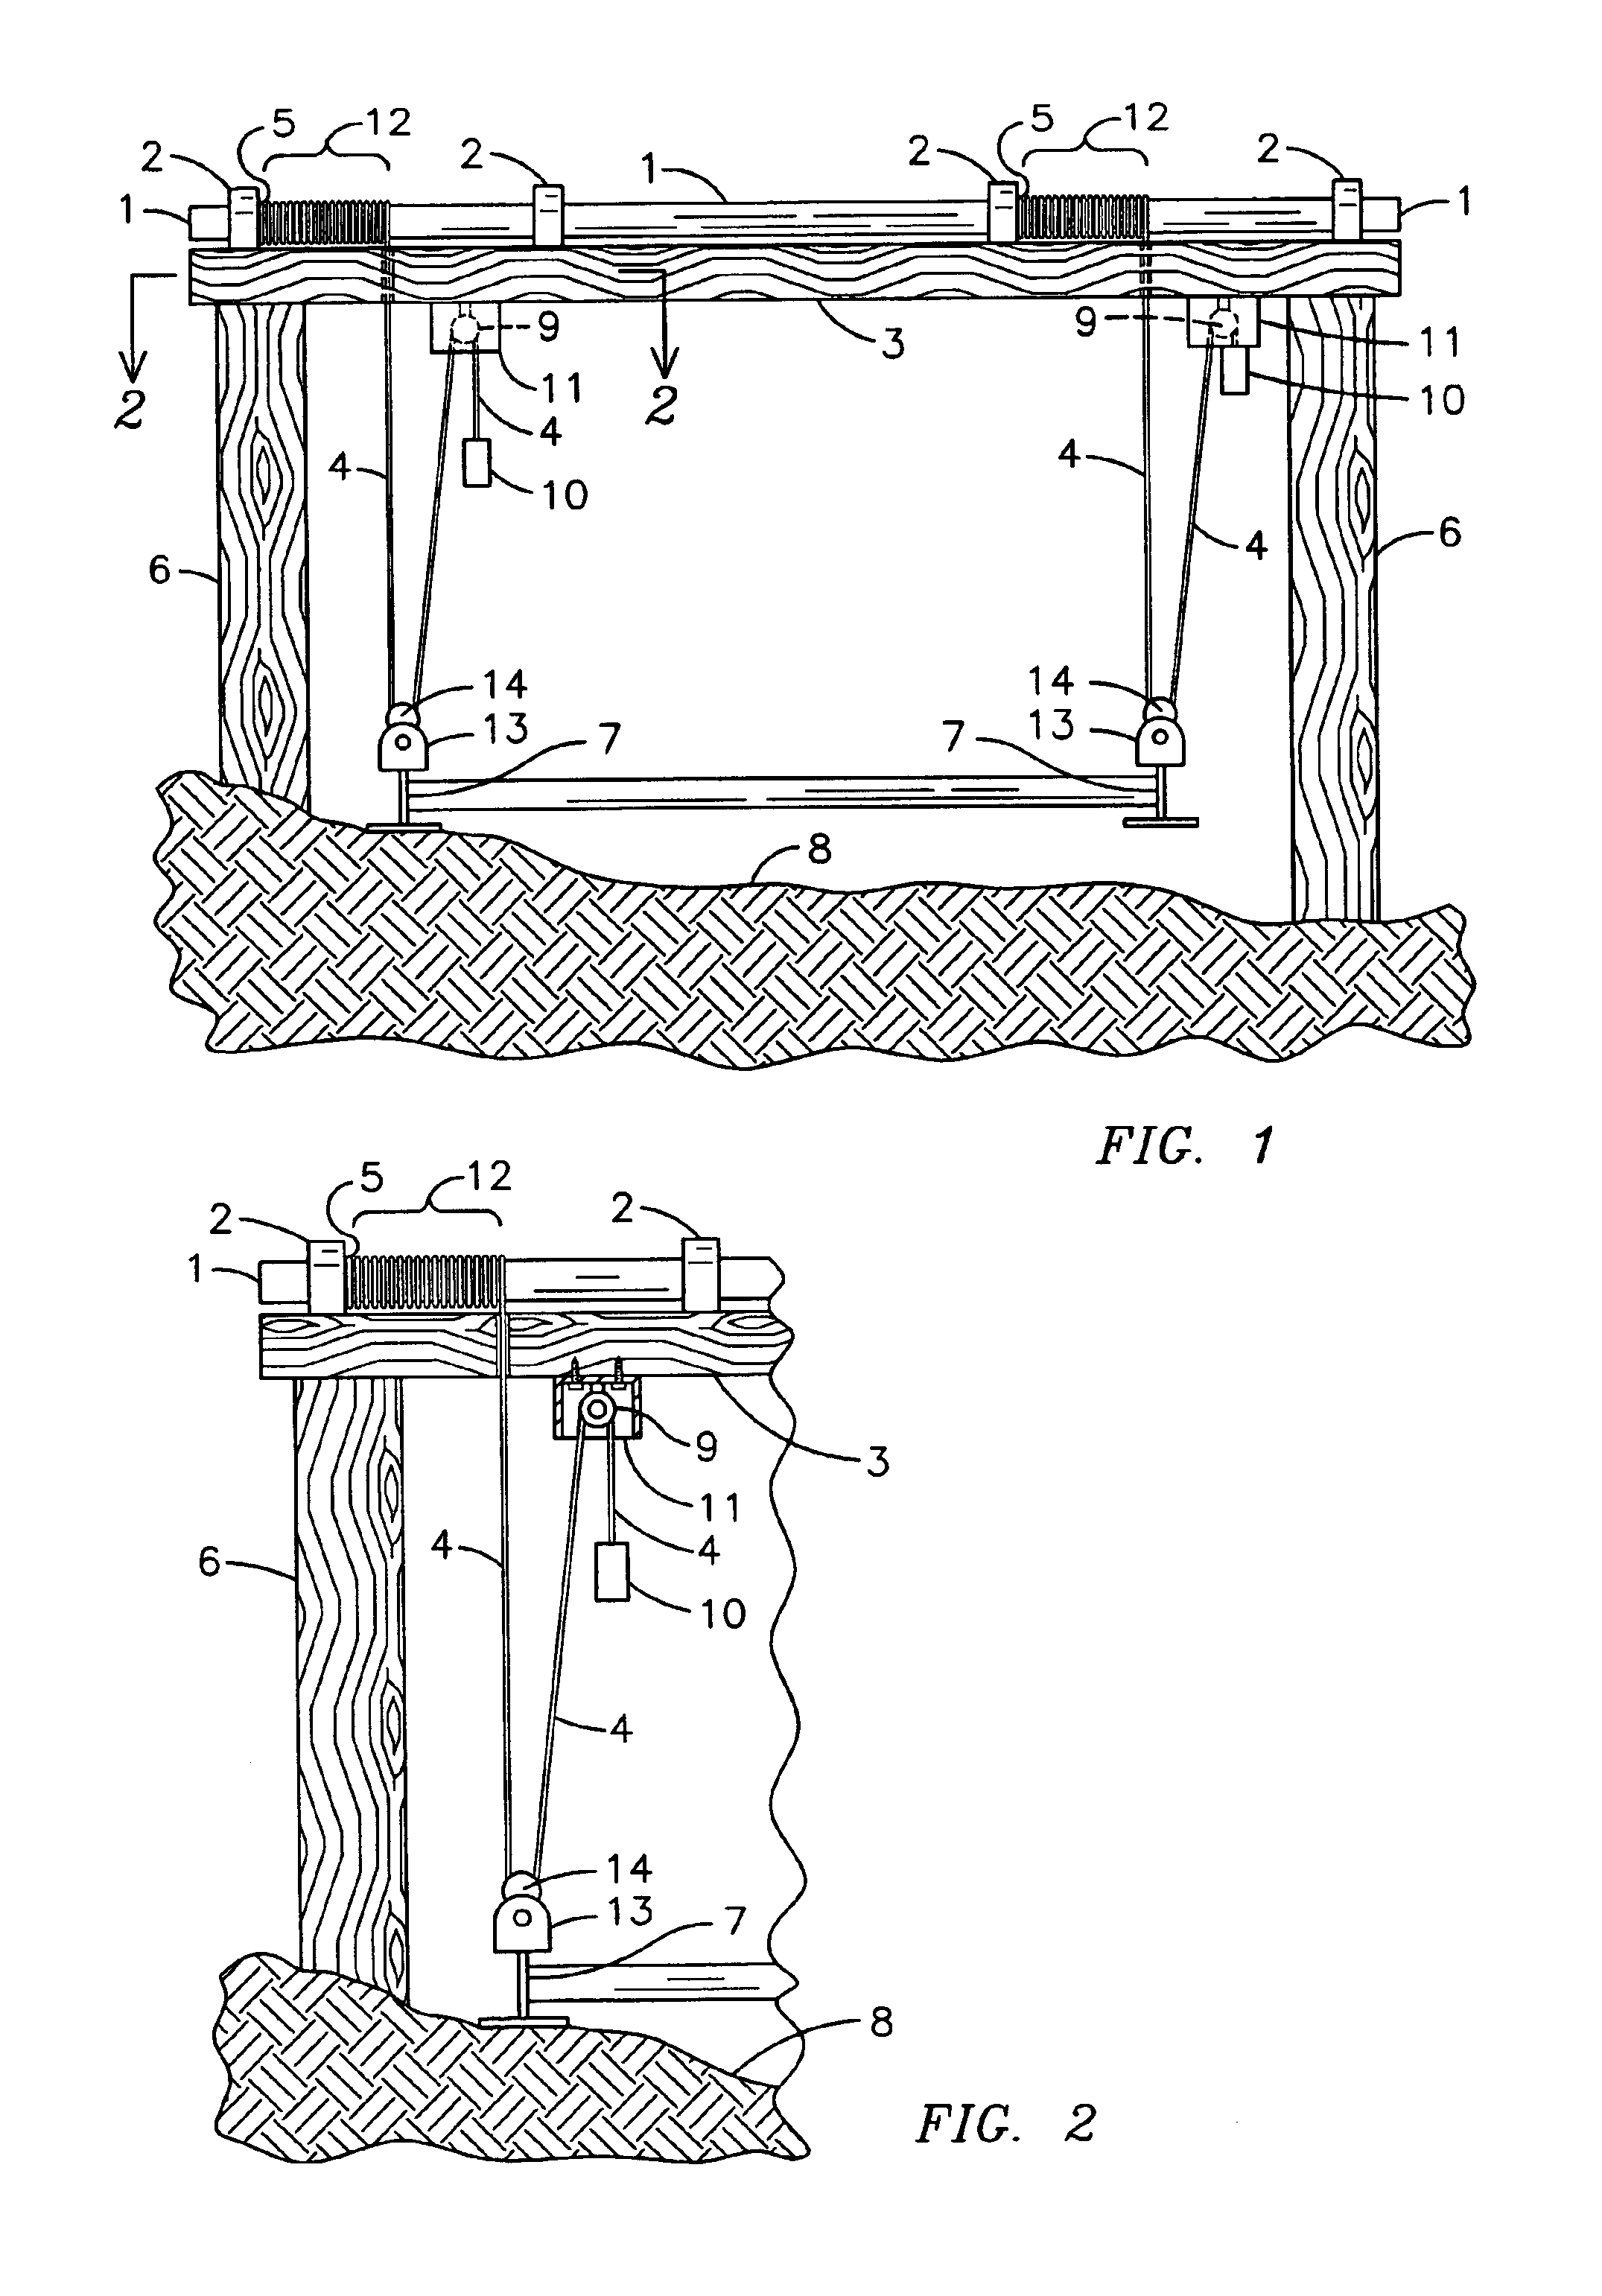 Device for maintaining tension on lift cables